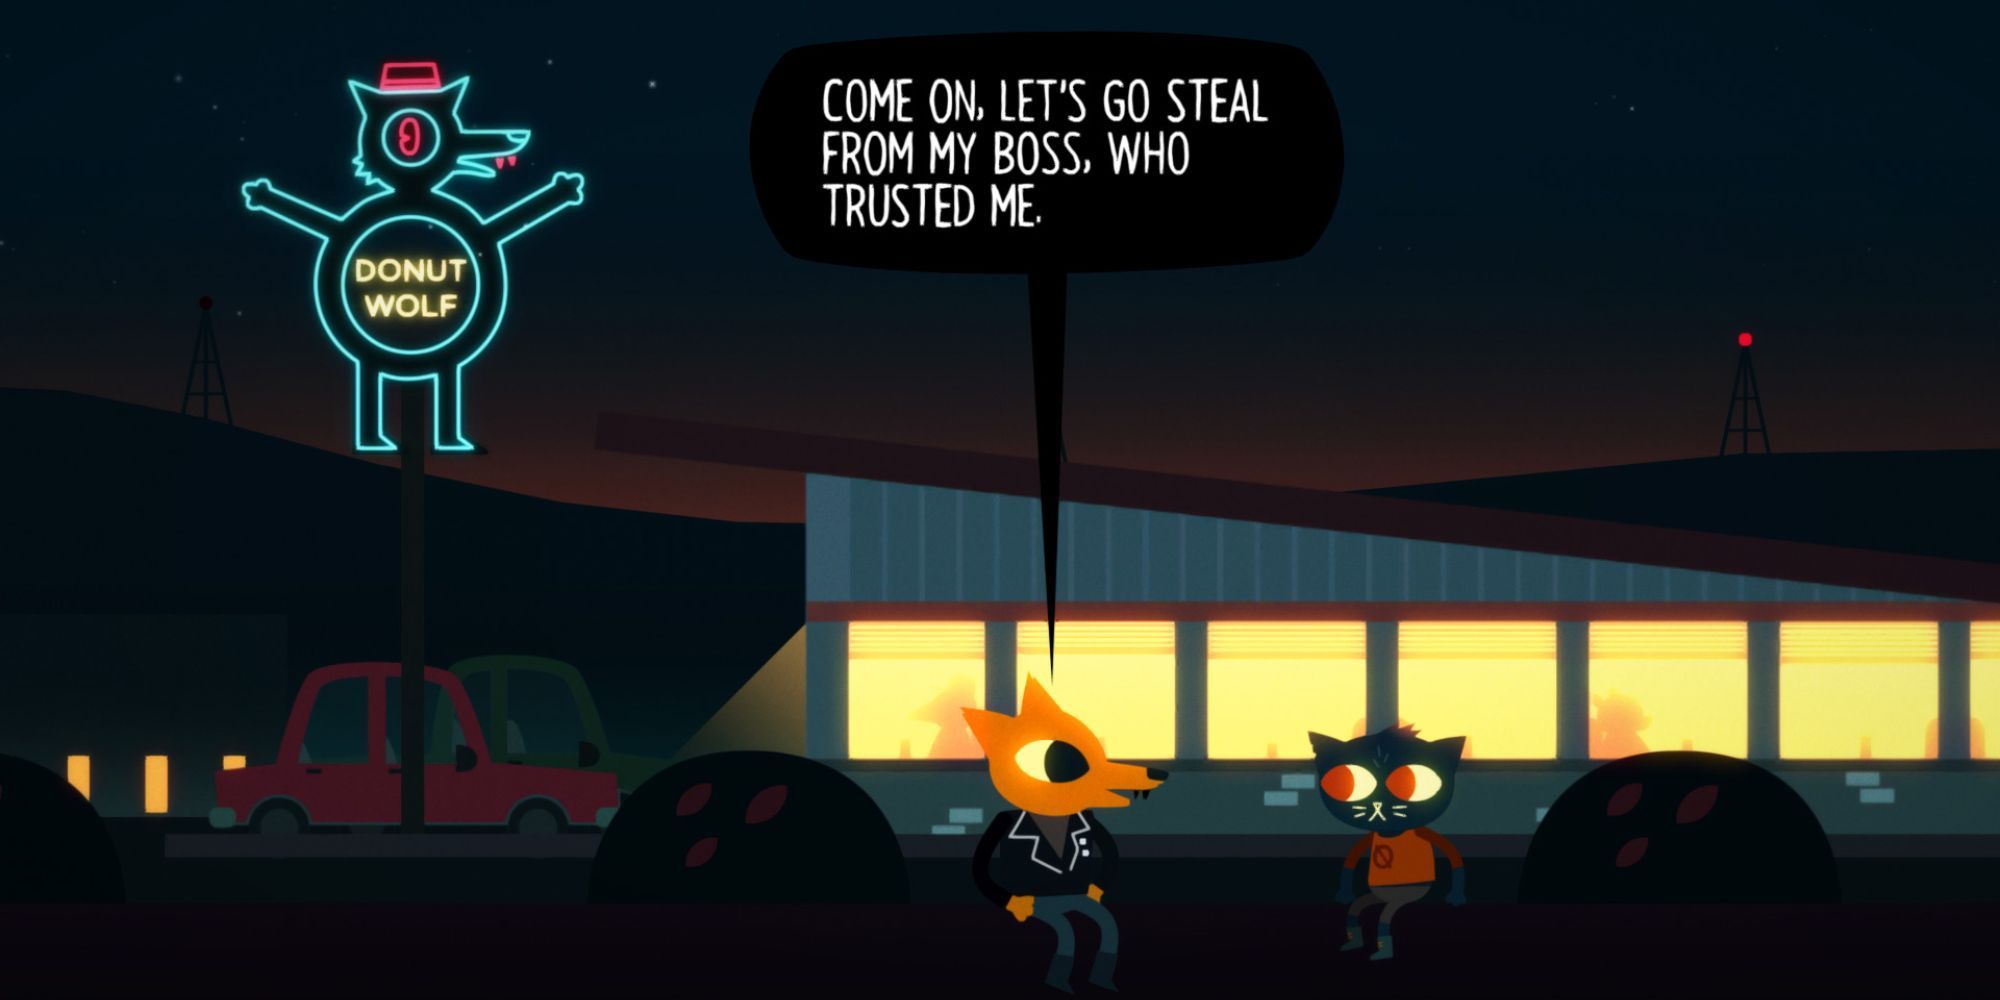 Greggory suggests theft to Mae outside of Donut Wolf